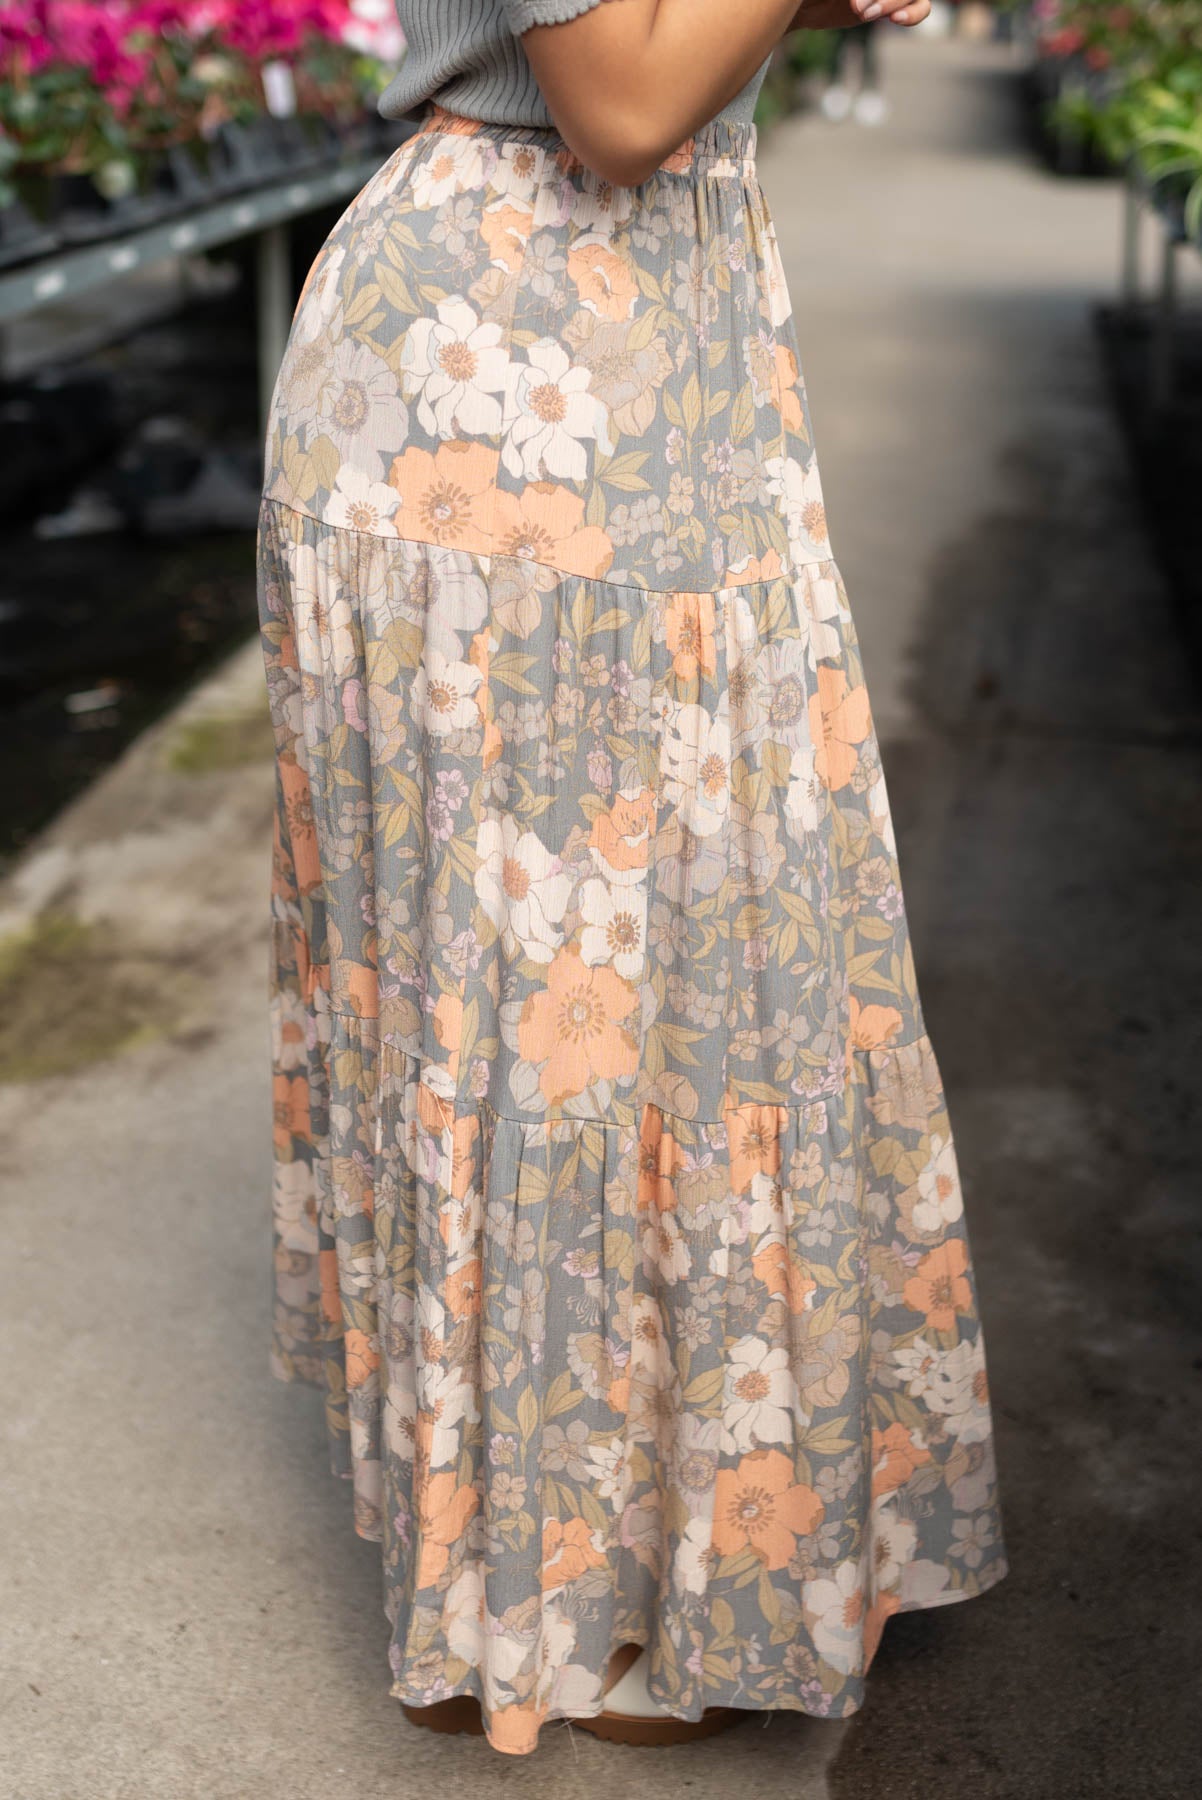 Side view of the grey floral skirt